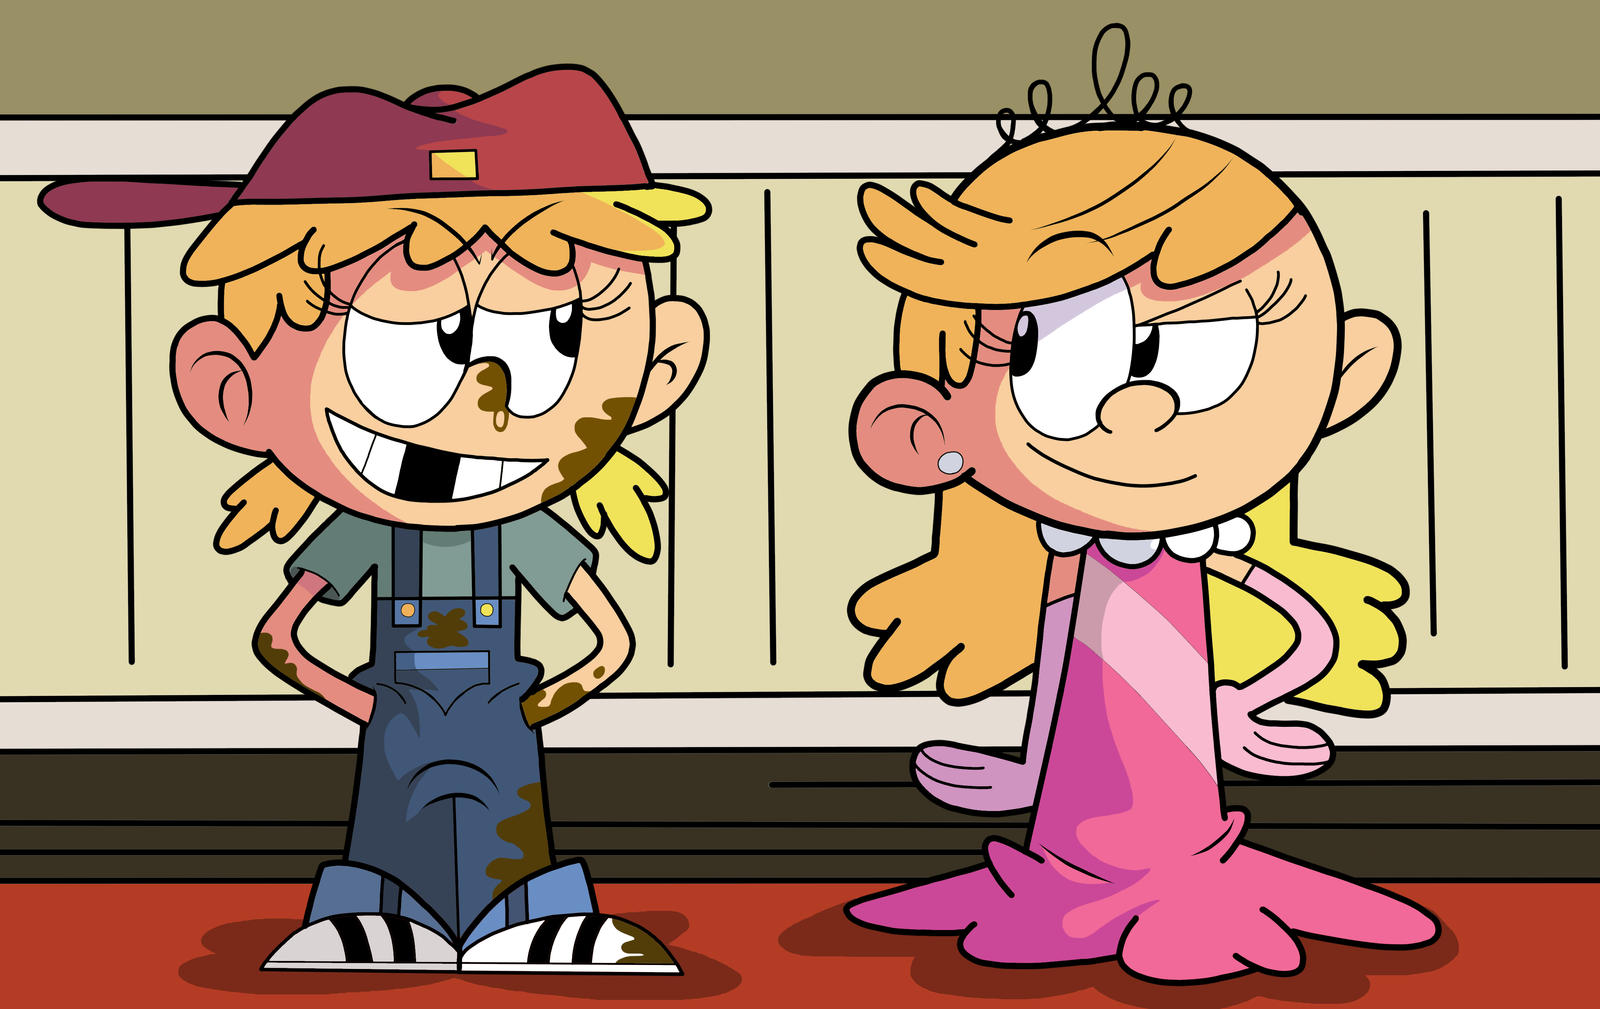 Lana And Lola The Loud House By Alexander Lr On Deviantart.